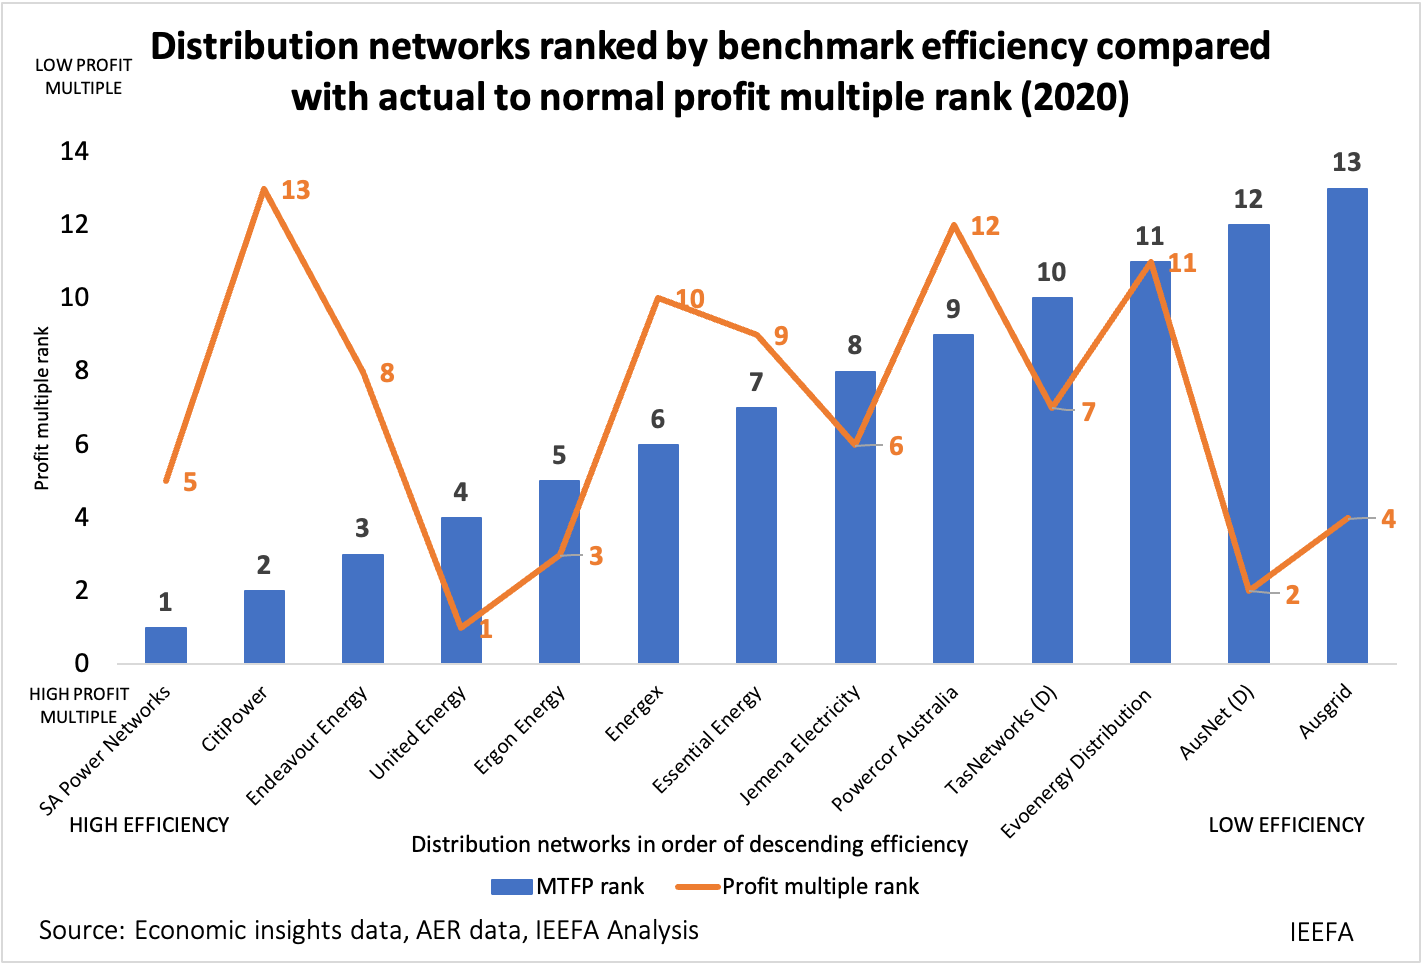 Distribution networks ranked by benchmark efficiency compared with actual to normal multiple profit rank (2020)